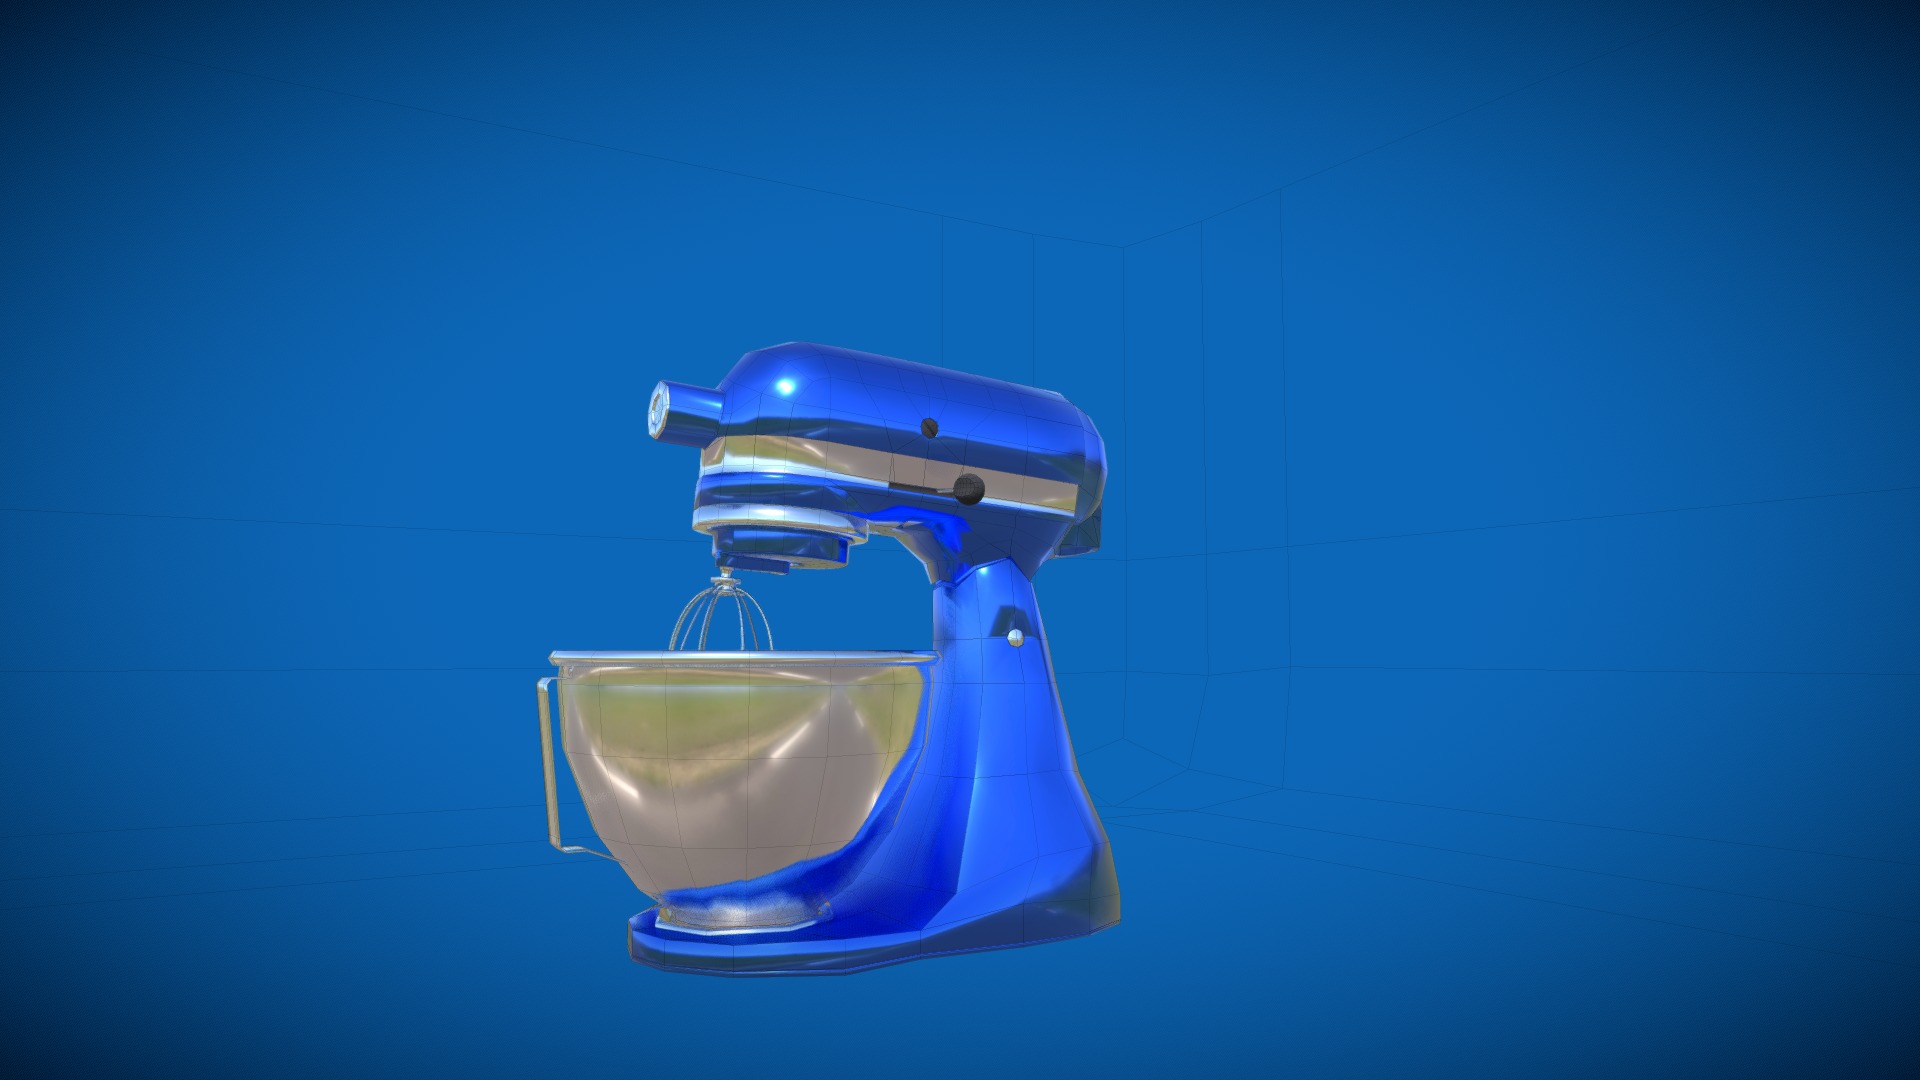 3D model food Mixer kitchen appliance - This is a 3D model of the food Mixer kitchen appliance. The 3D model is about a glass beaker with a liquid in it.